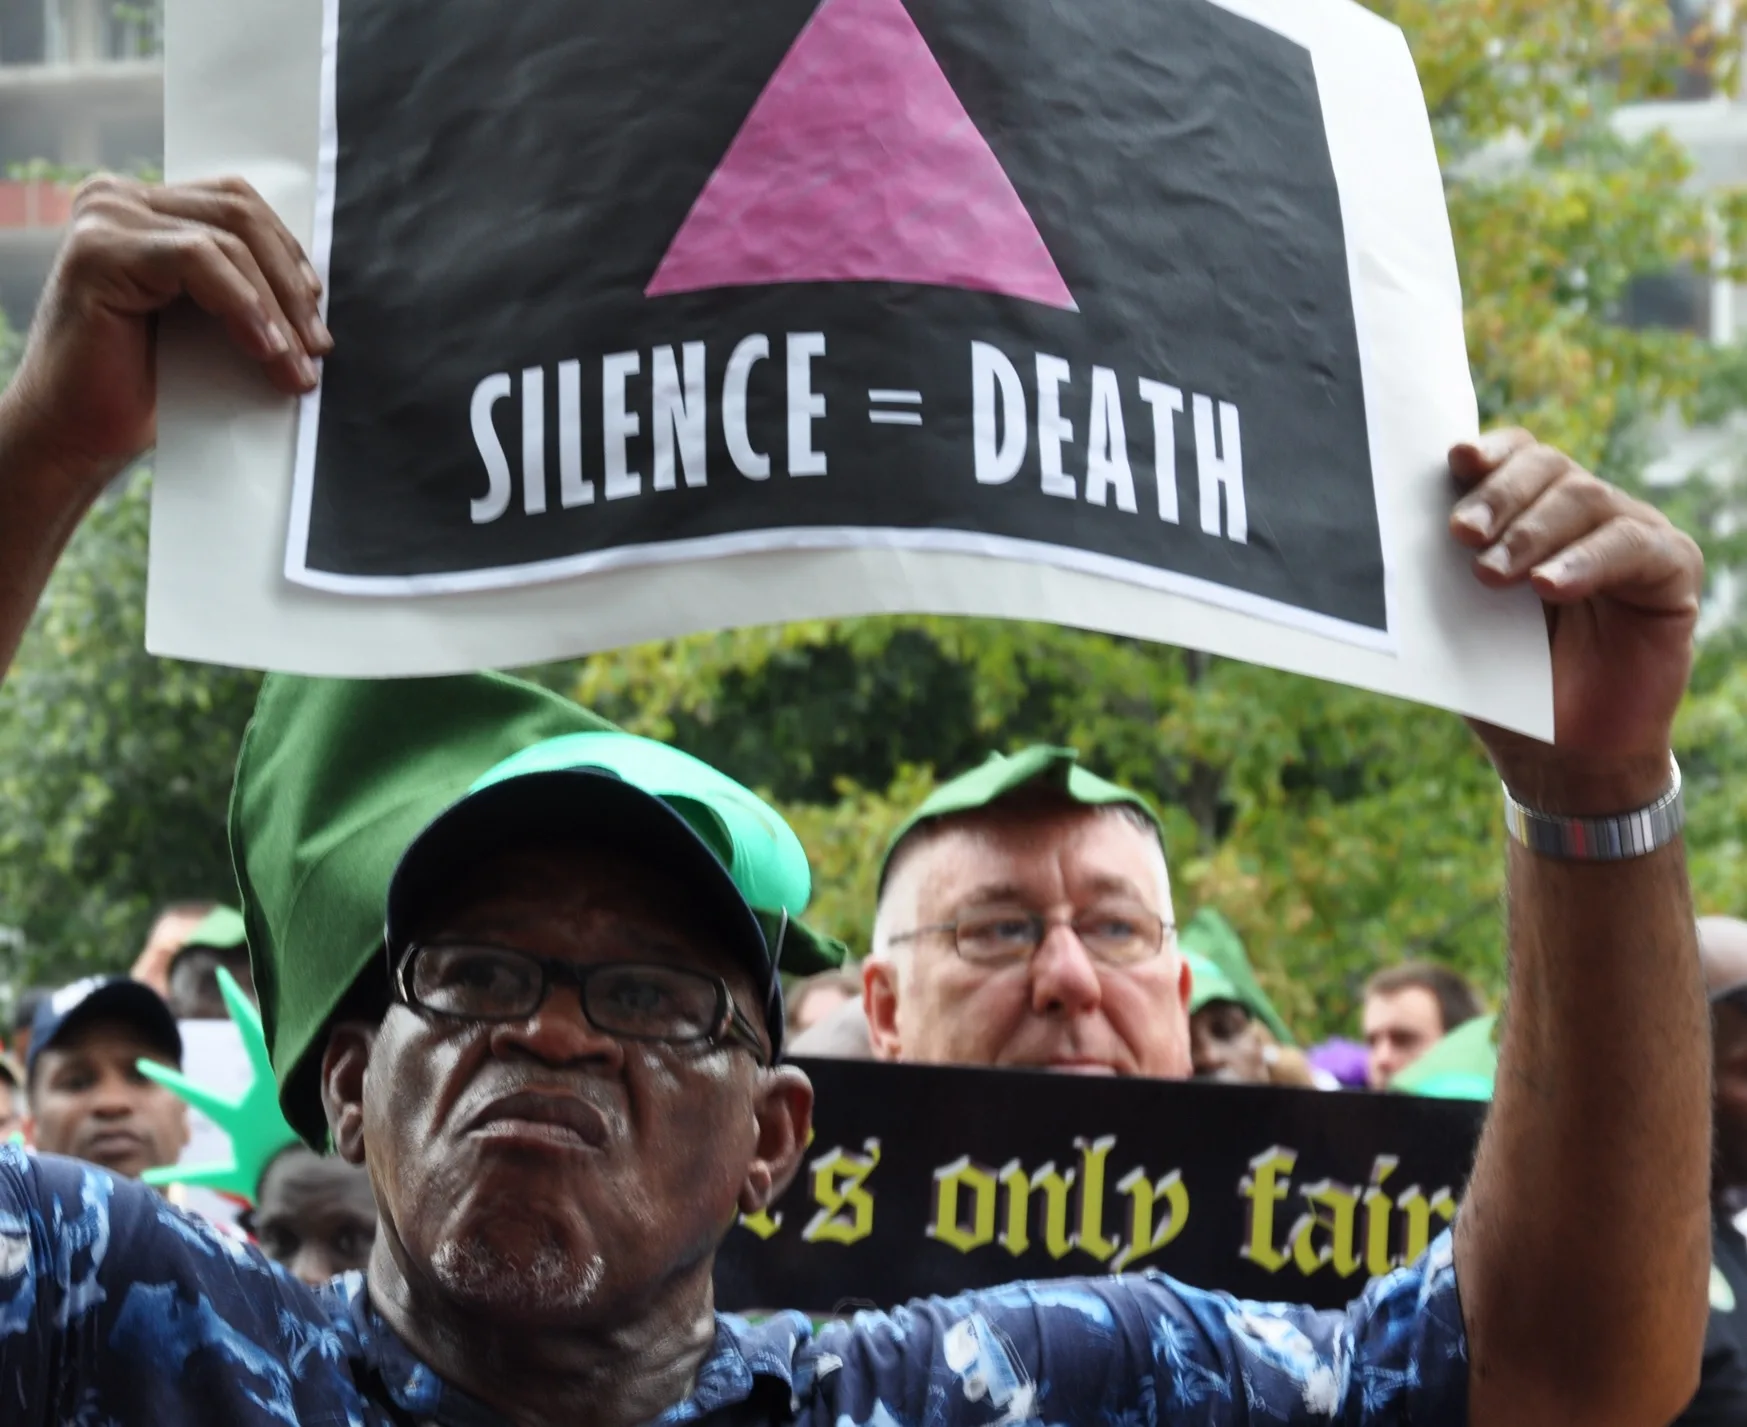 This photo shows a man outdoors at a protest holding an Act Up sign that states "Silence = Death." The sign is black with white lettering and a pink triangle.